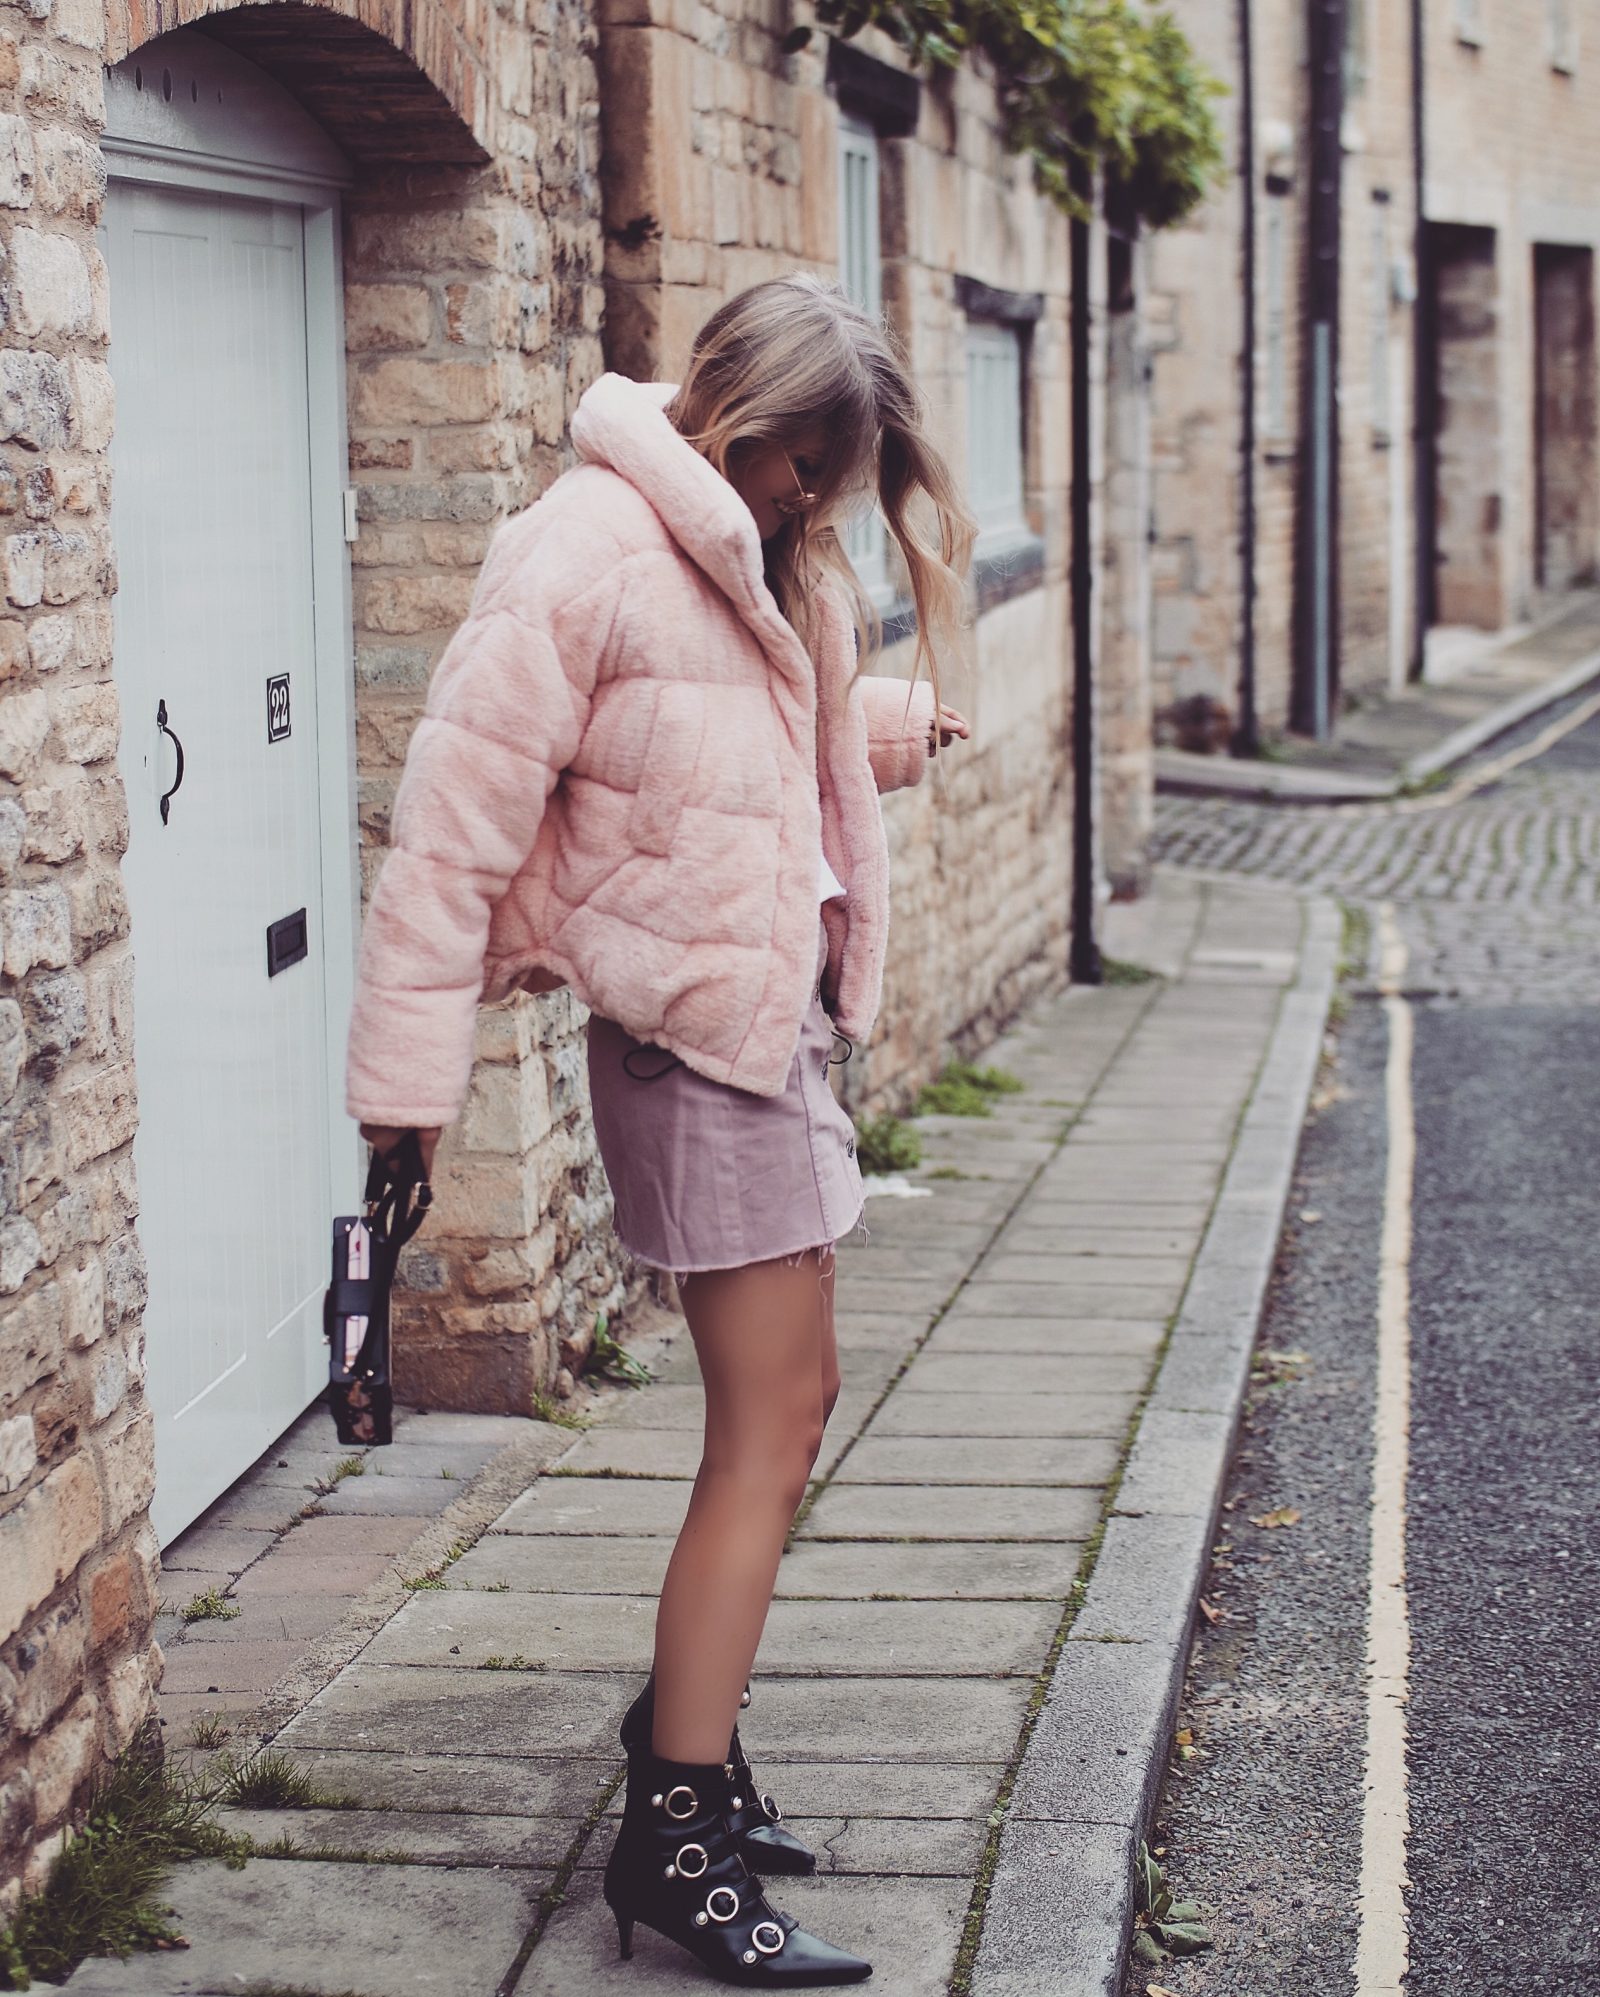 Teddy Puffa Jacket - All Pink Outfit 